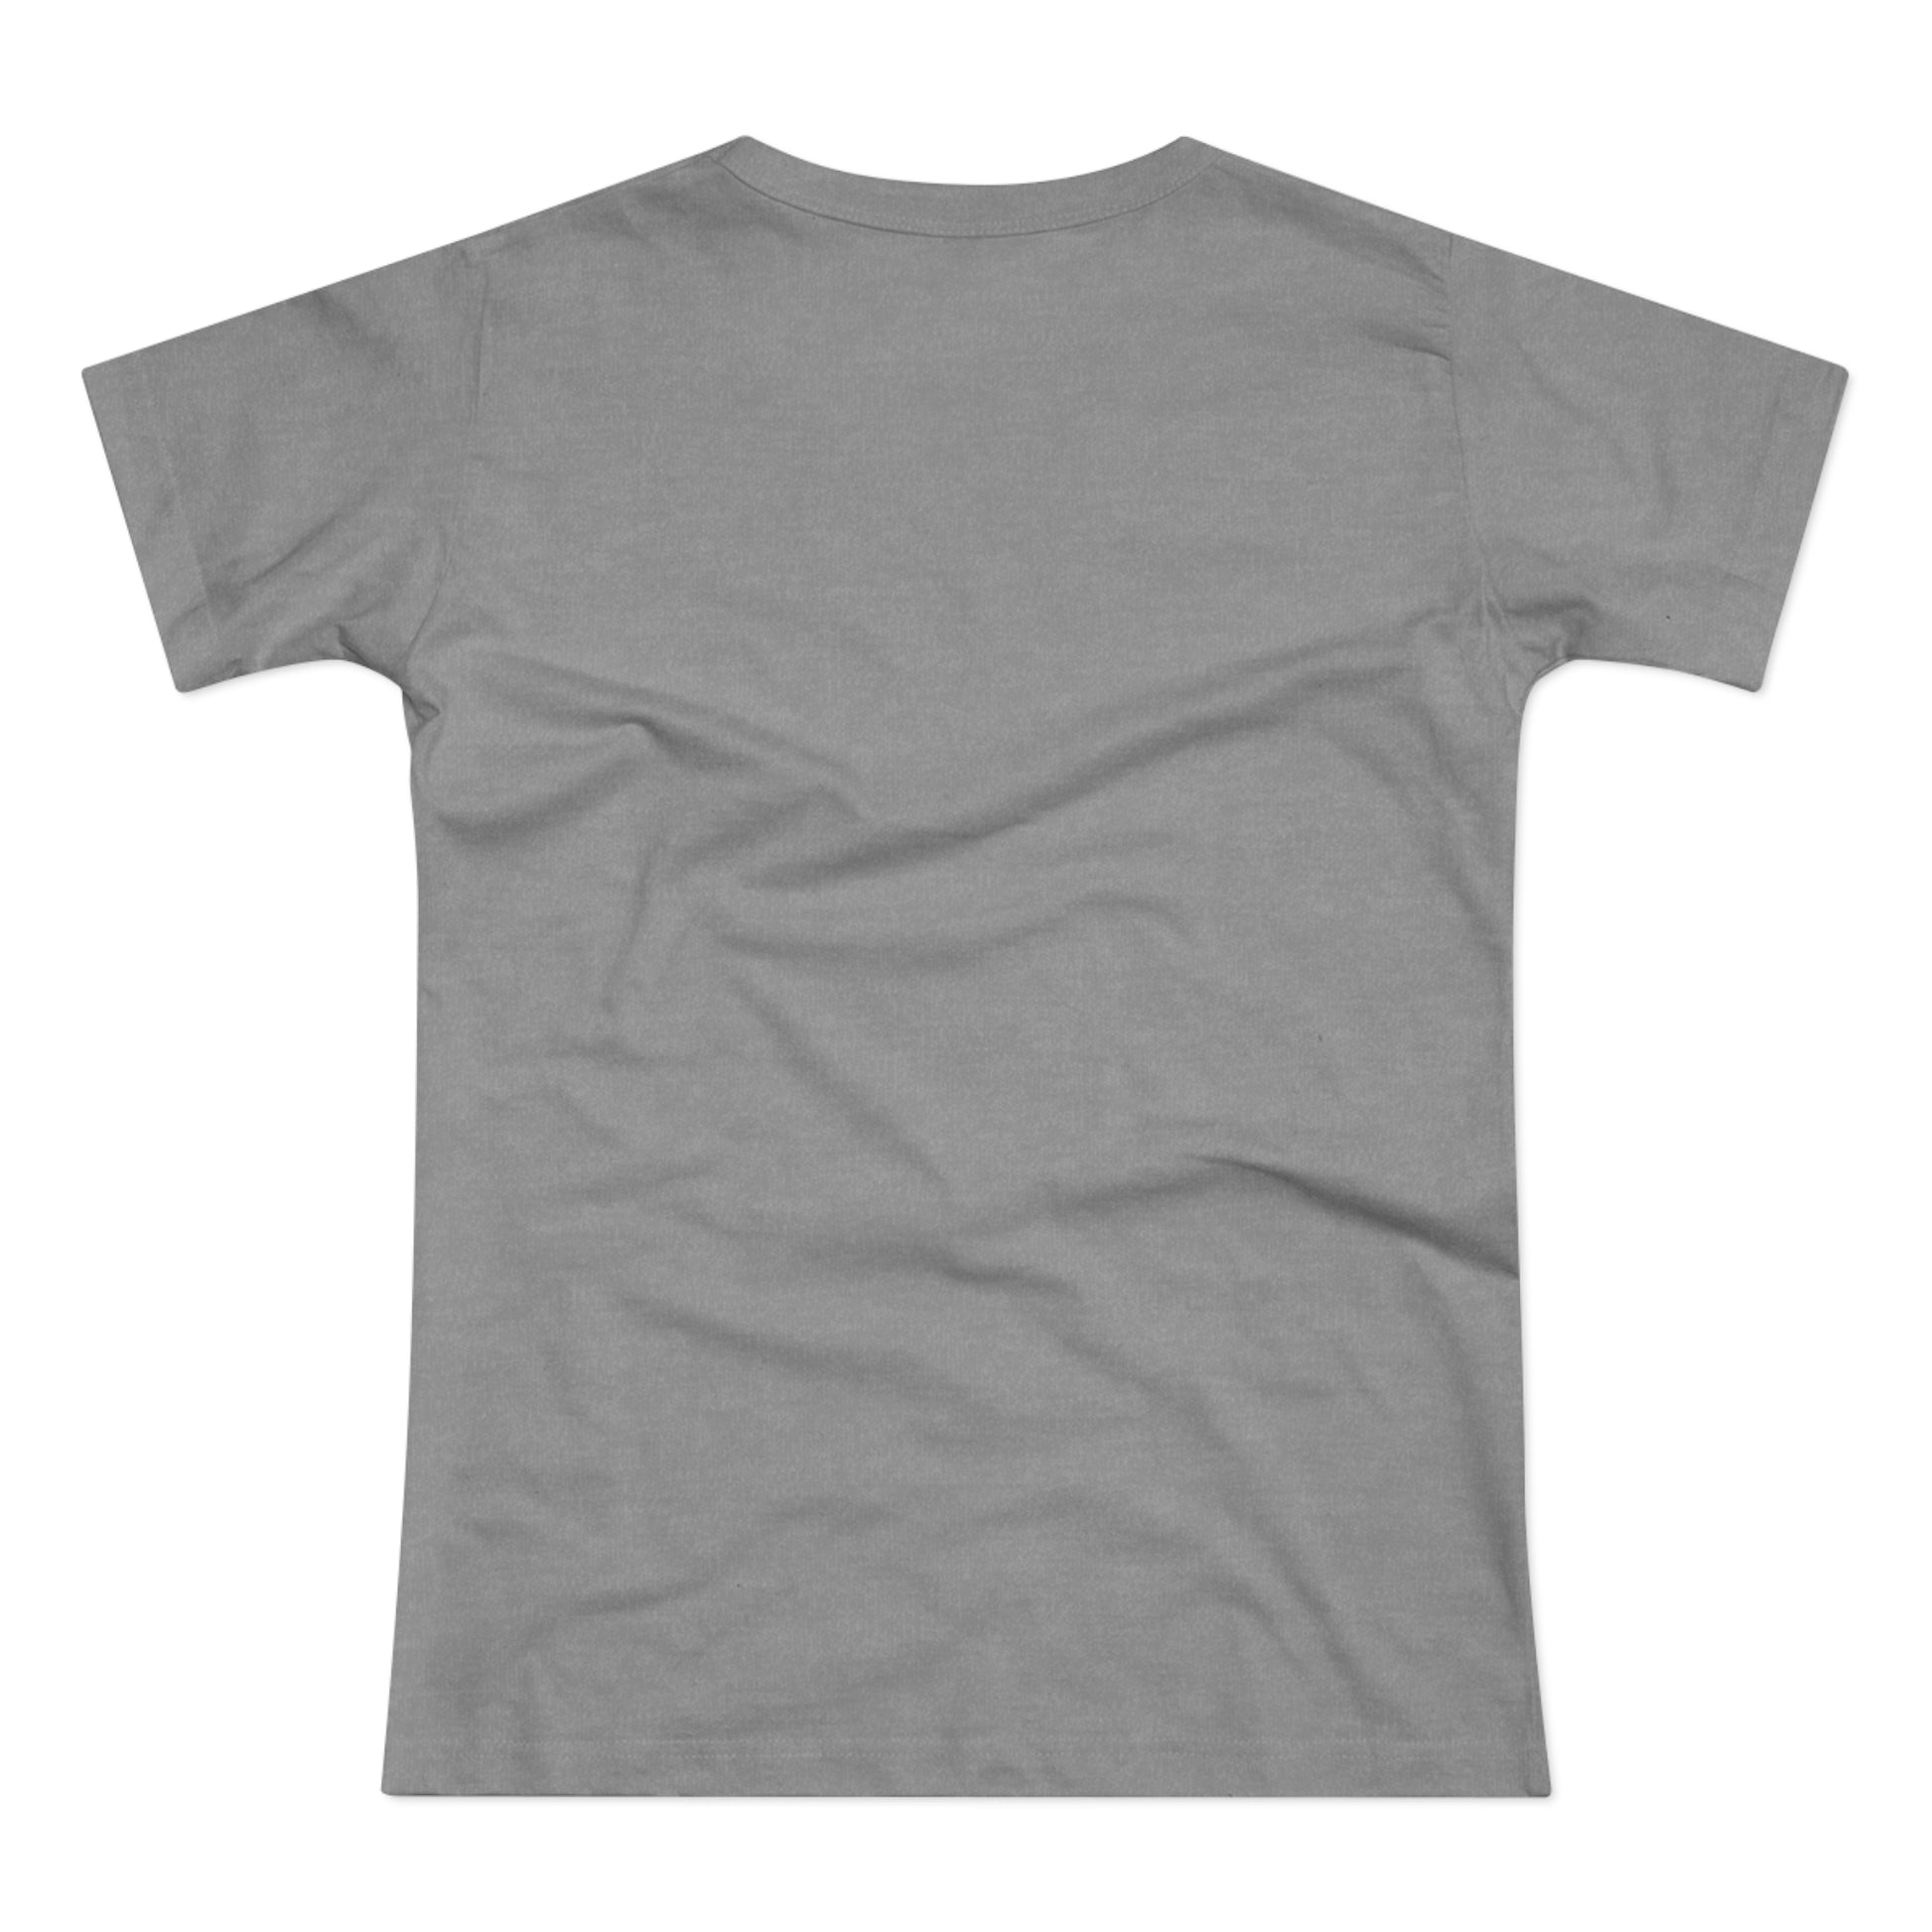 a grey t - shirt with a white background